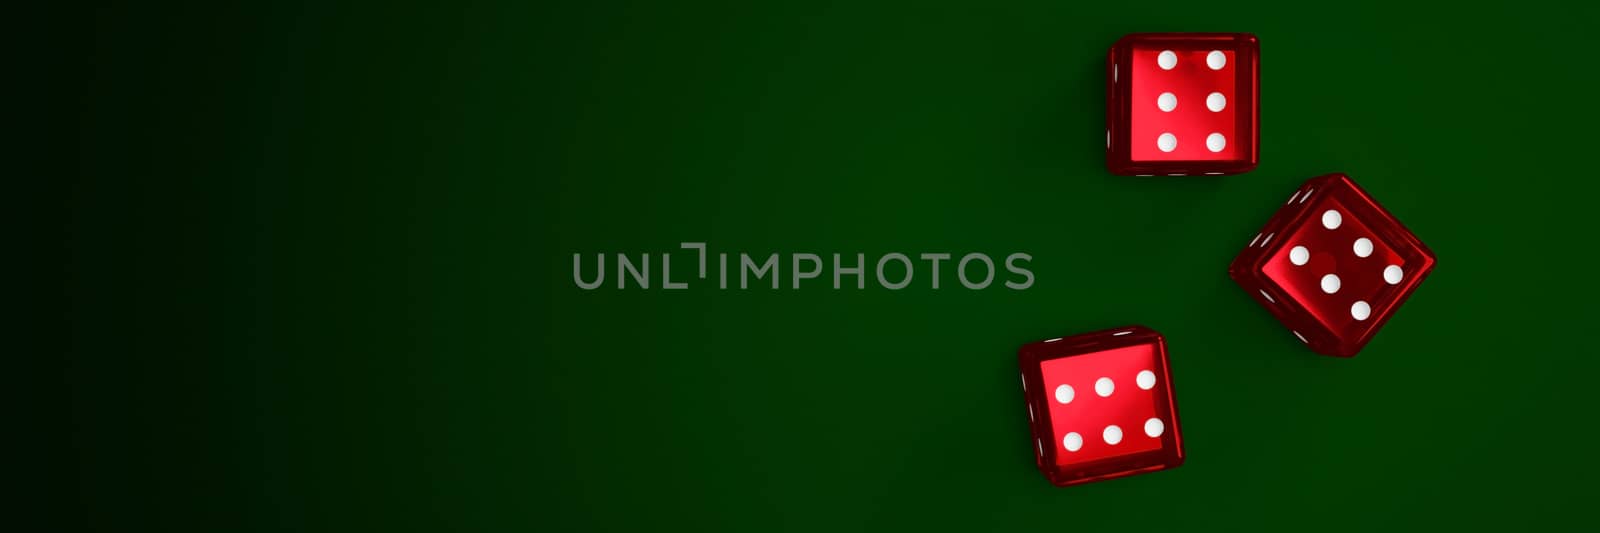 Transparent red dice are falling on the green felt table. The concept of dice gambling in casinos. 3D Rendering